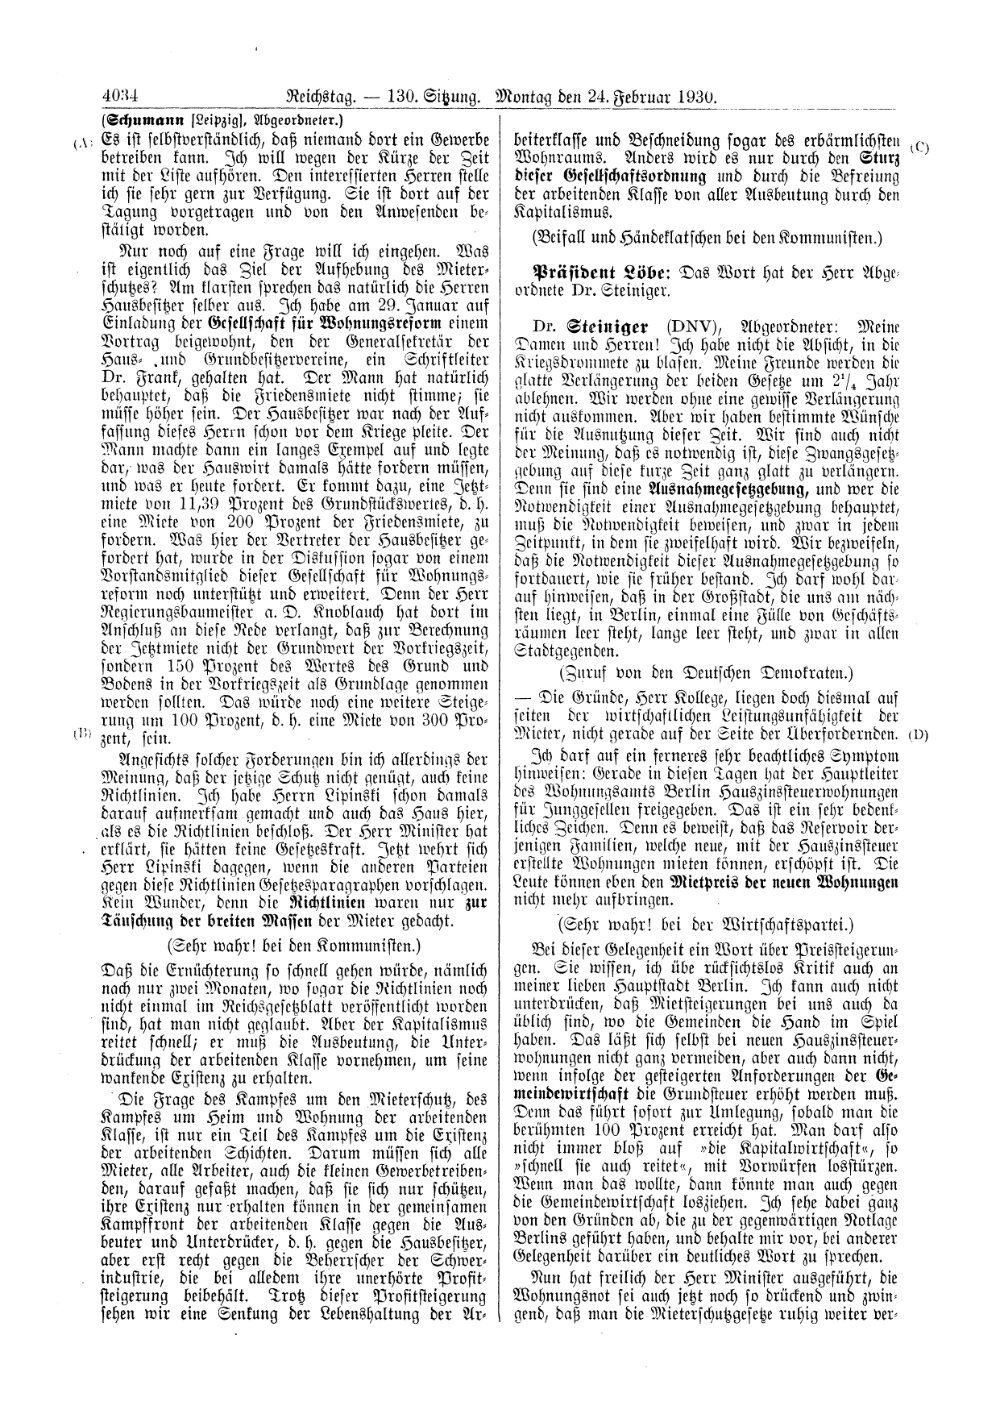 Scan of page 4034